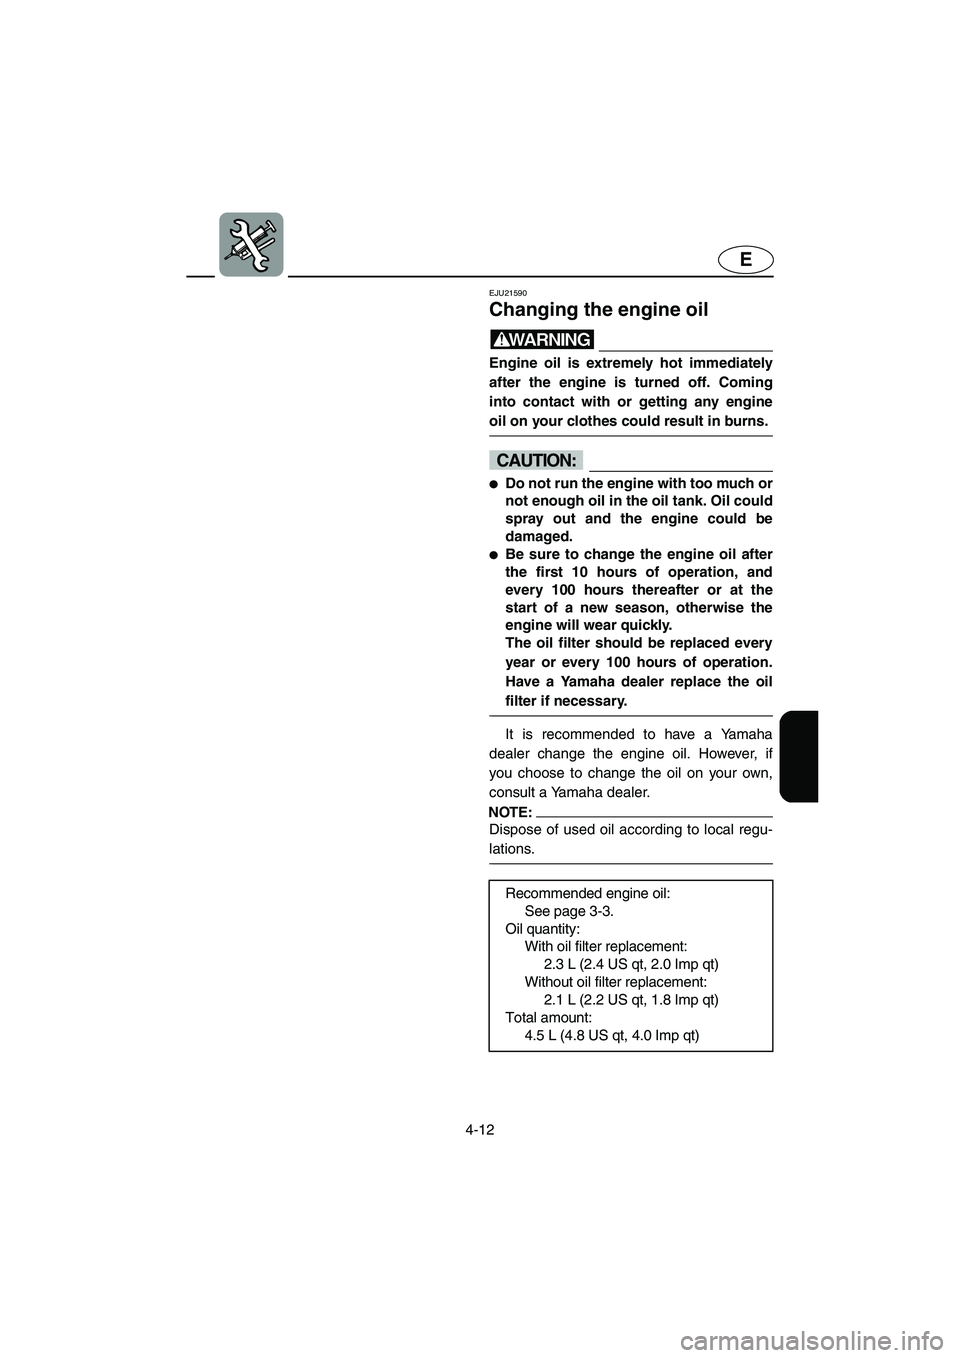 YAMAHA FX HO 2006  Owners Manual 4-12
E
EJU21590 
Changing the engine oil 
WARNING@ Engine oil is extremely hot immediately
after the engine is turned off. Coming
into contact with or getting any engine
oil on your clothes could resu